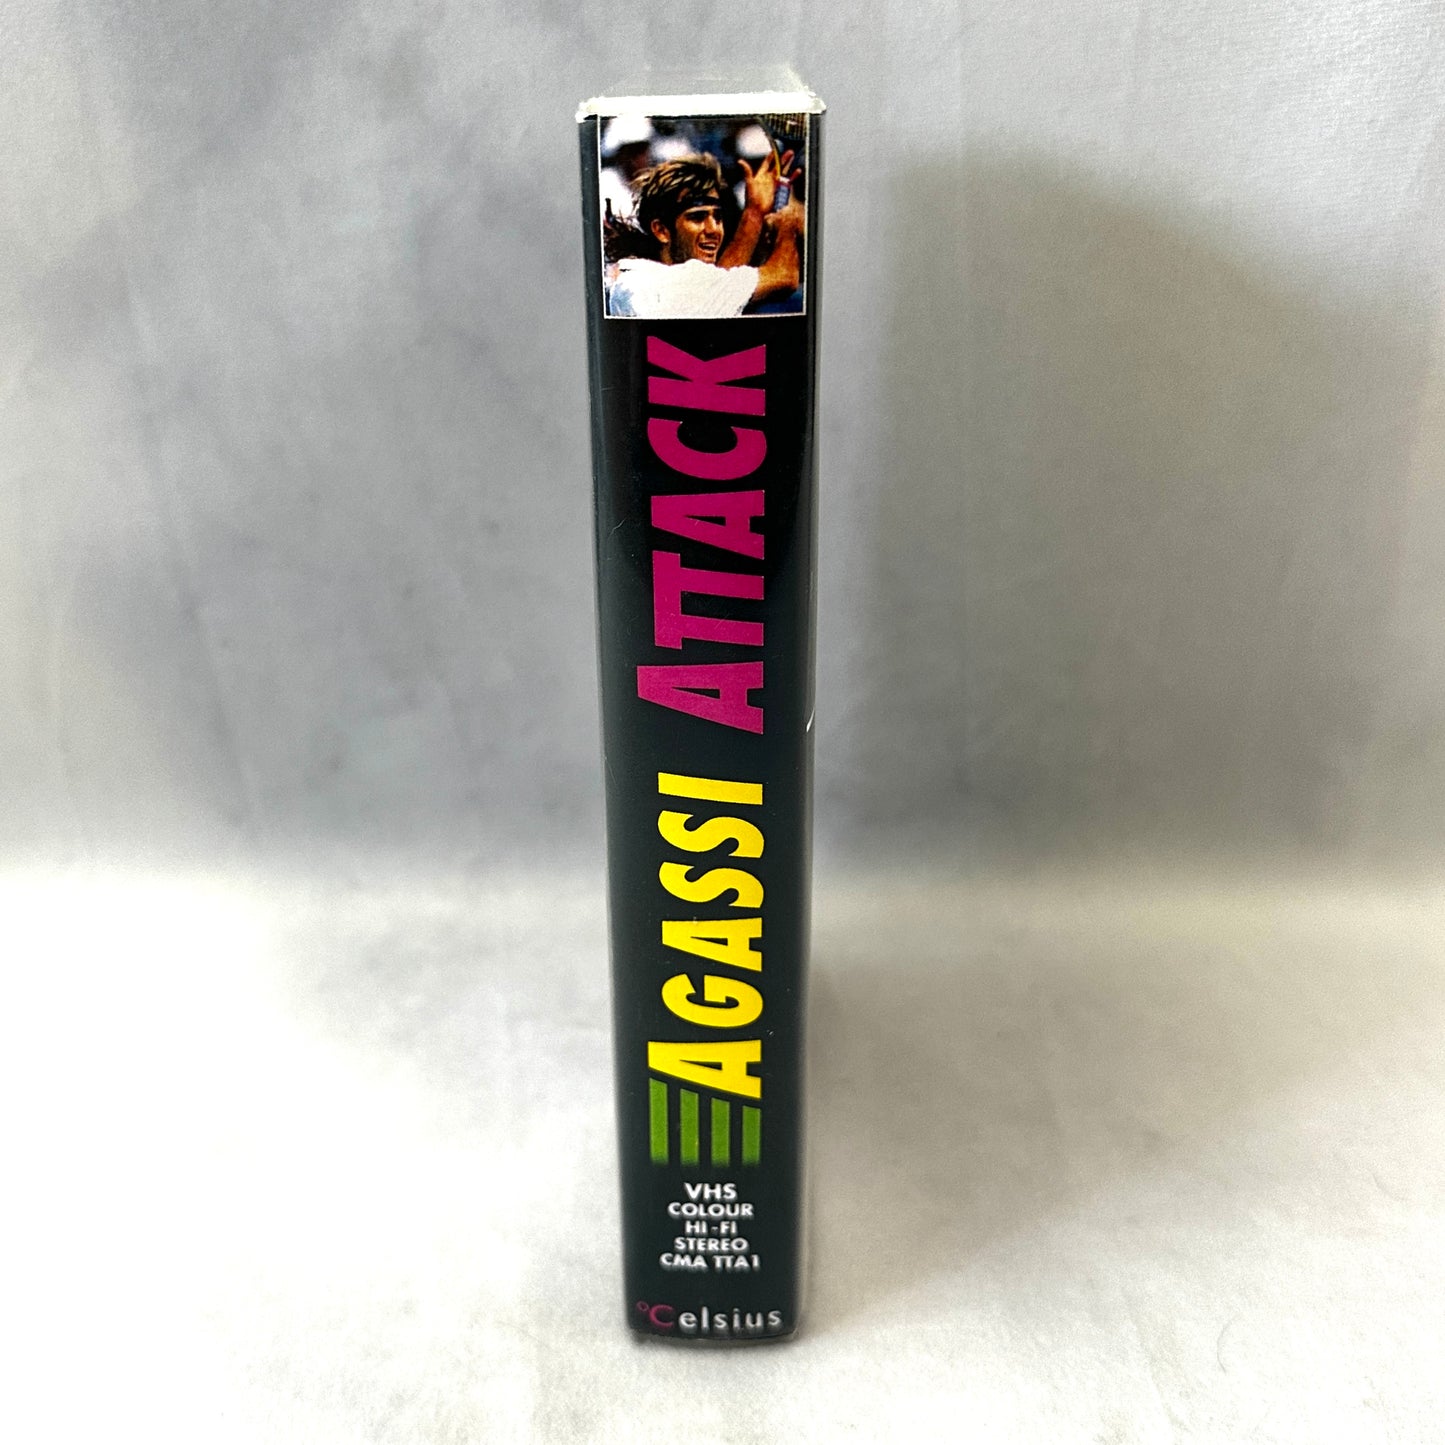 Andre Agassi Attack Nick Bollettieri Tennis Training VHS Video Tape 1992